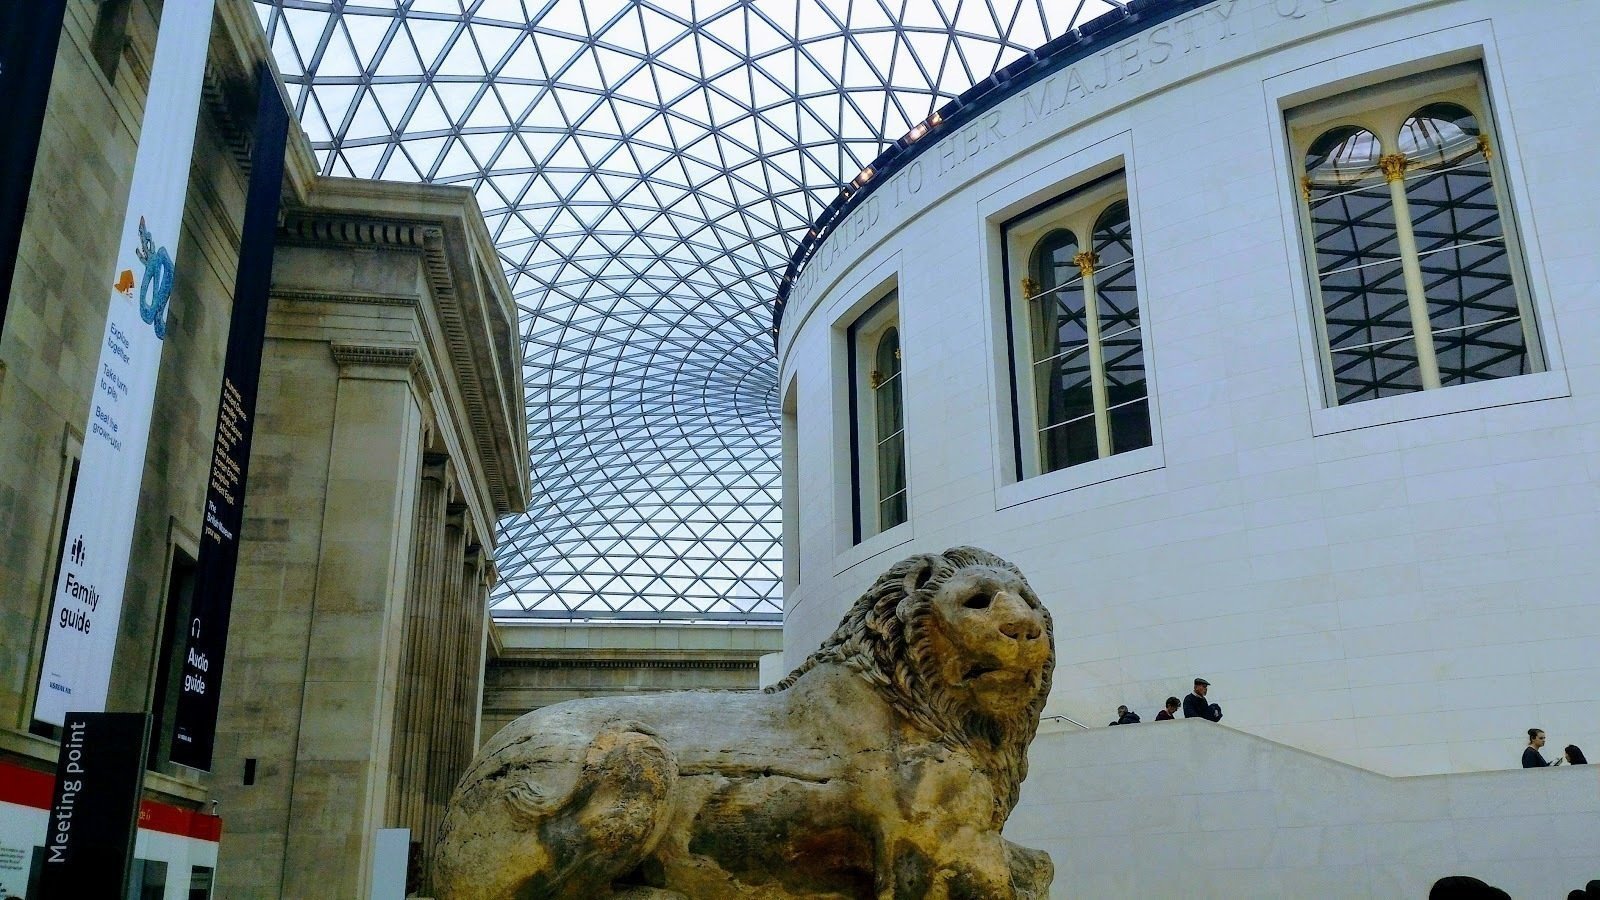 <span class="translation_missing" title="translation missing: en.meta.location_title, location_name: The British Museum, city: London">Location Title</span>